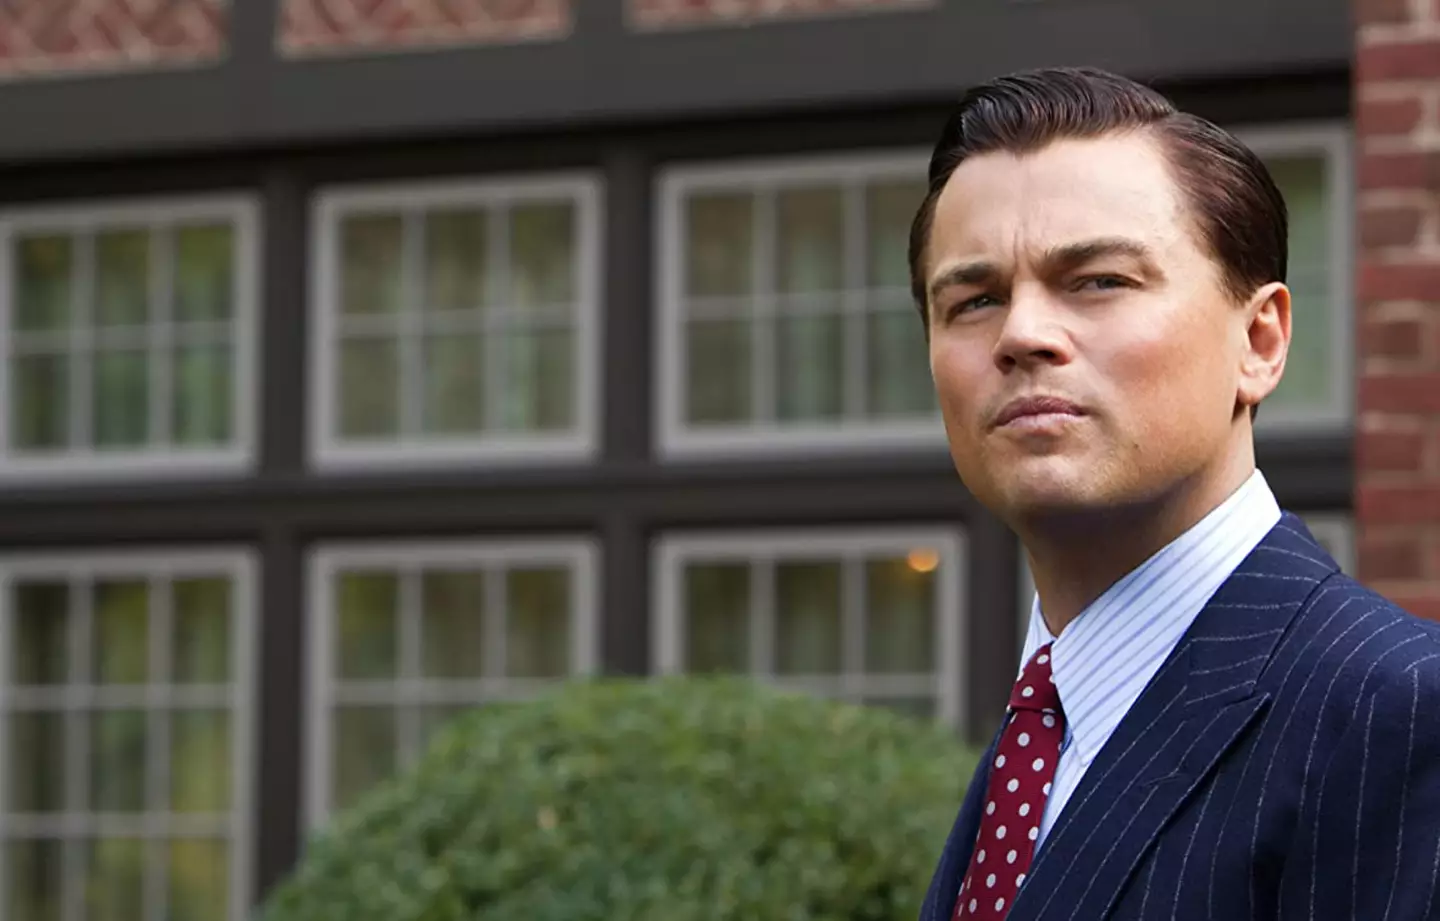 The Wolf of Wall Street actor nearly gave up his iconic name.